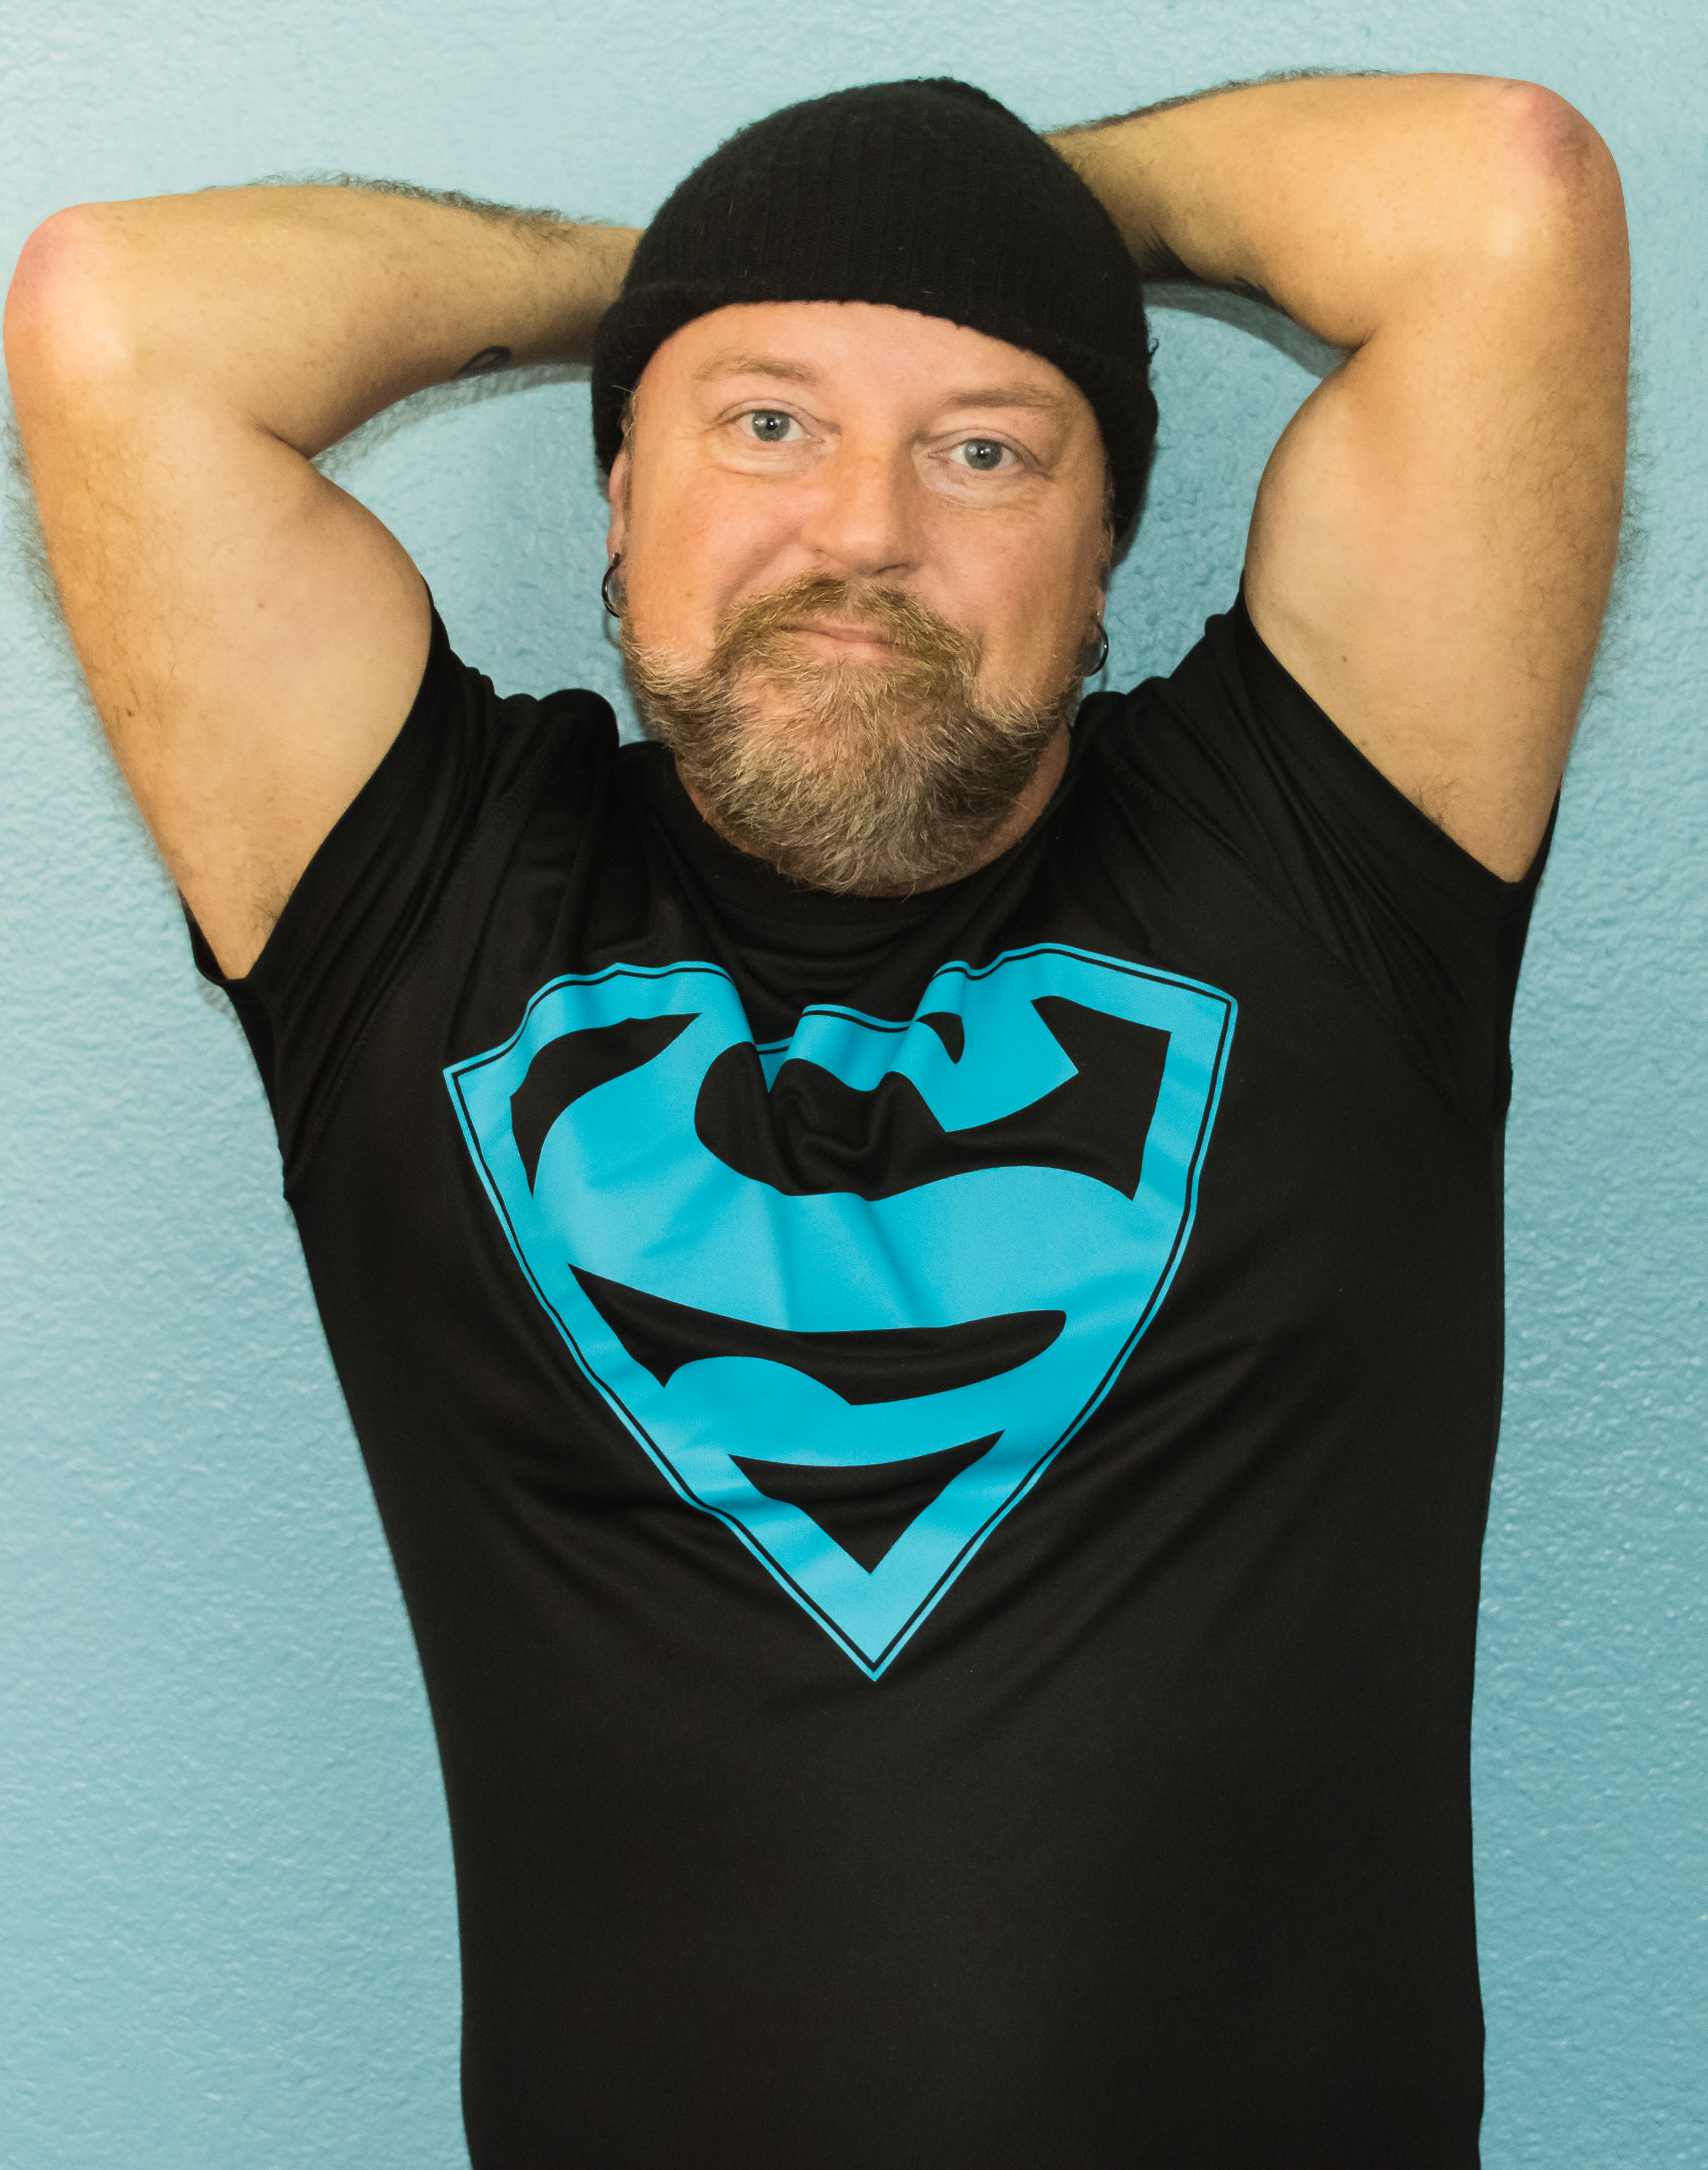 Superman Sessions - over 100 pounds off as of March 2015